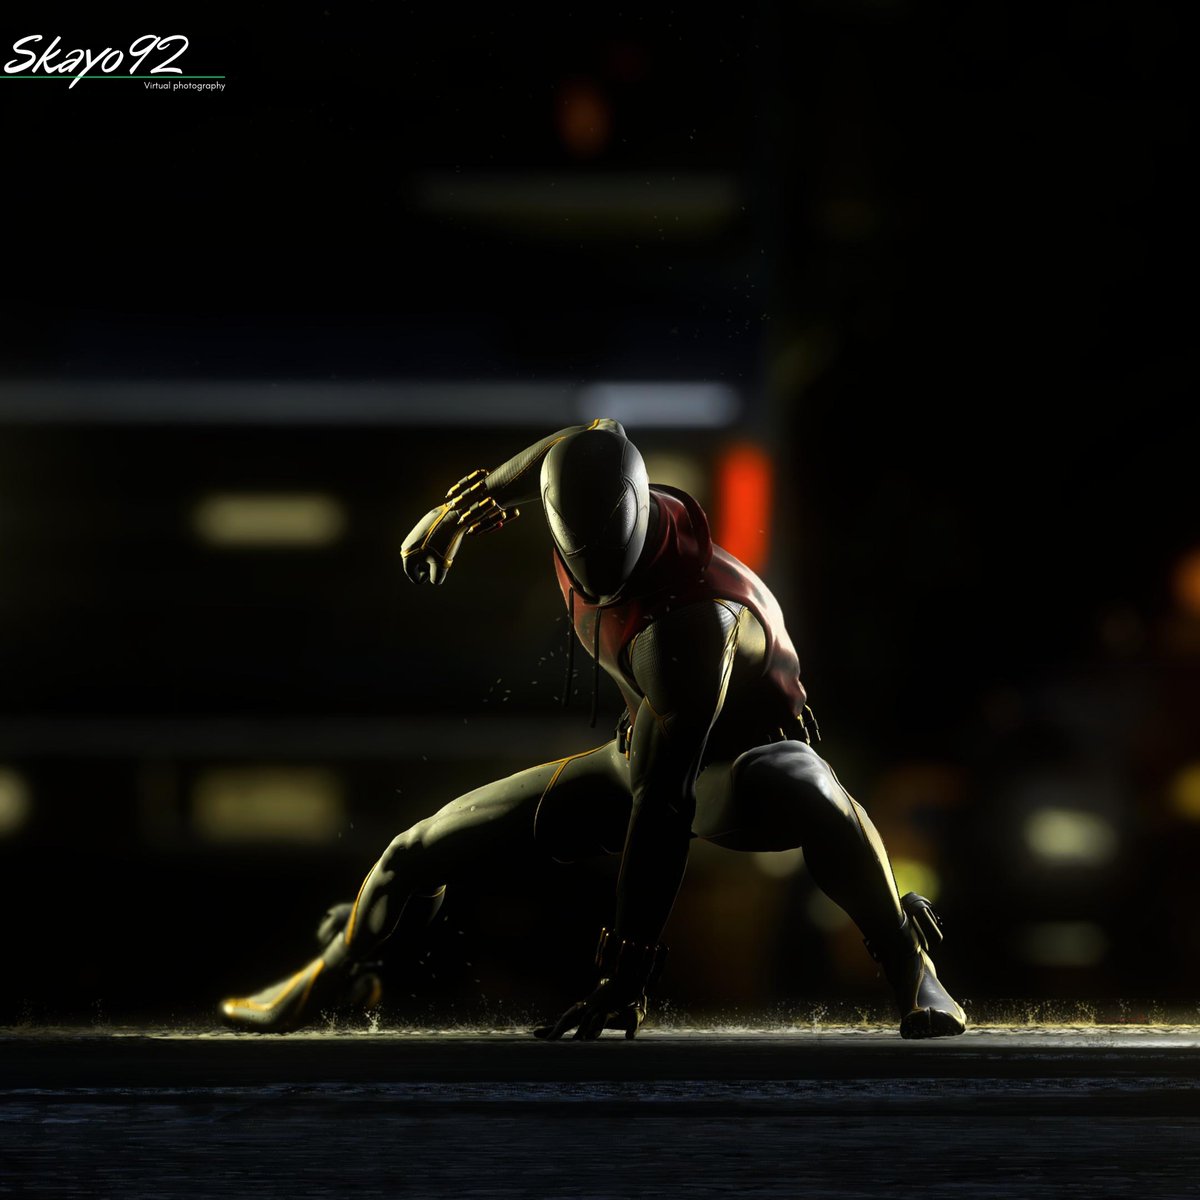 In to the Night

🏷️
#SpiderMan2PS5 #spiderman #artisticofsociety #spidermancomics #ps5  #playstation #virtualphotography #vgpunite #vpcollective #marvel #hero #photomode #insomniacgames #insomniacgamescommunity #begreatertogether #editing #art #photo #vp #ArtisticofSociety